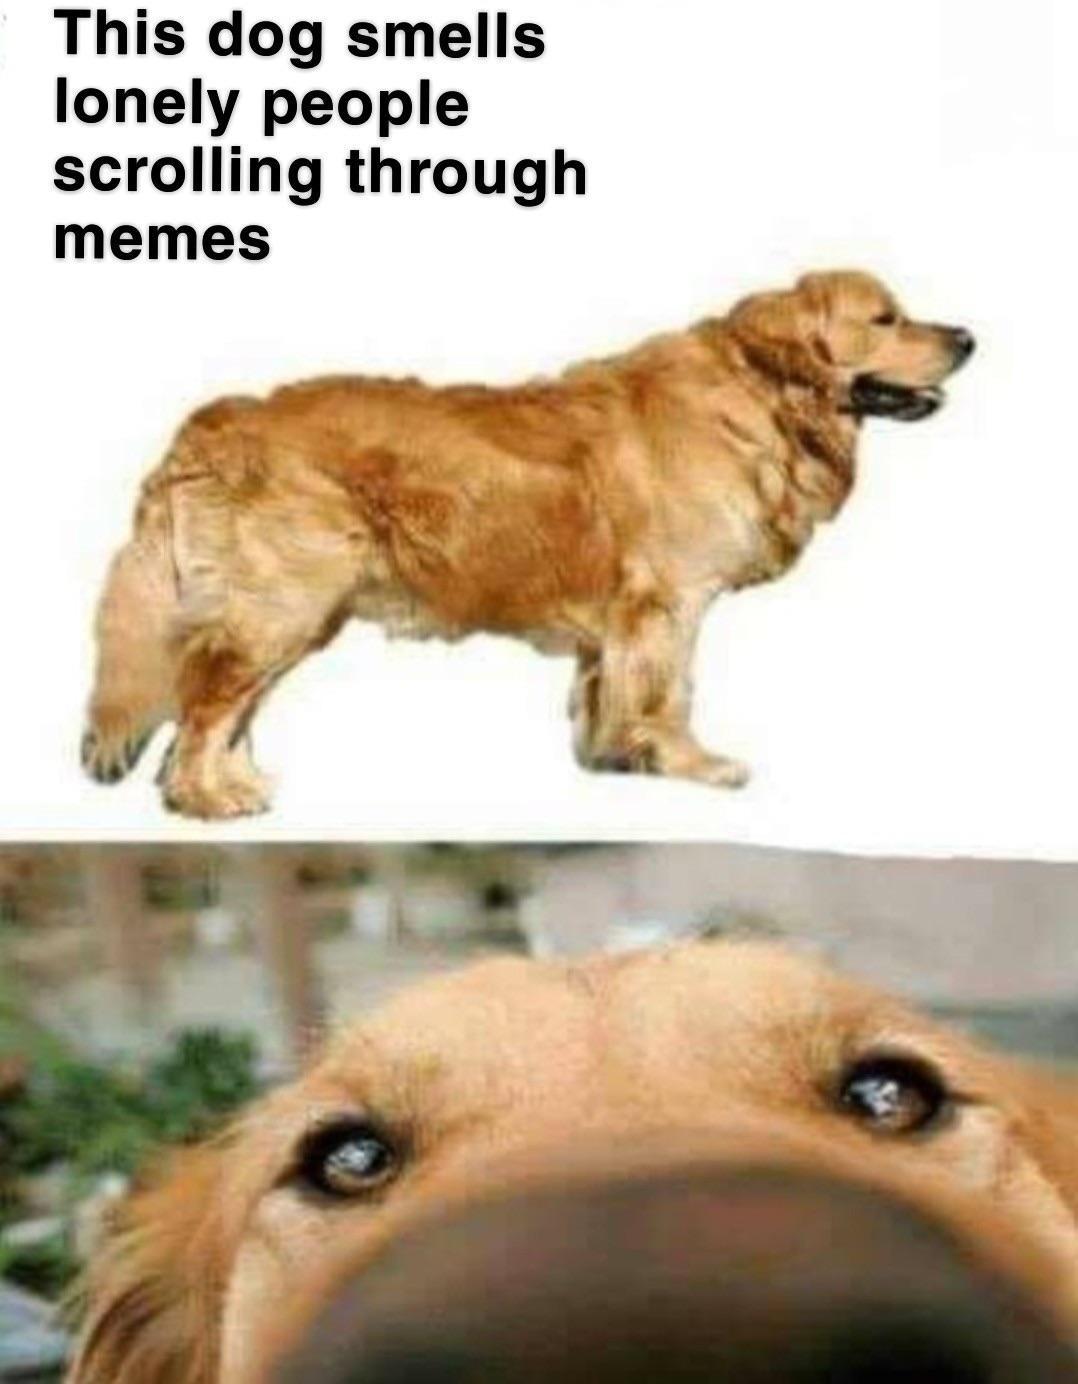 lonely meme - This dog smells lonely people scrolling through memes